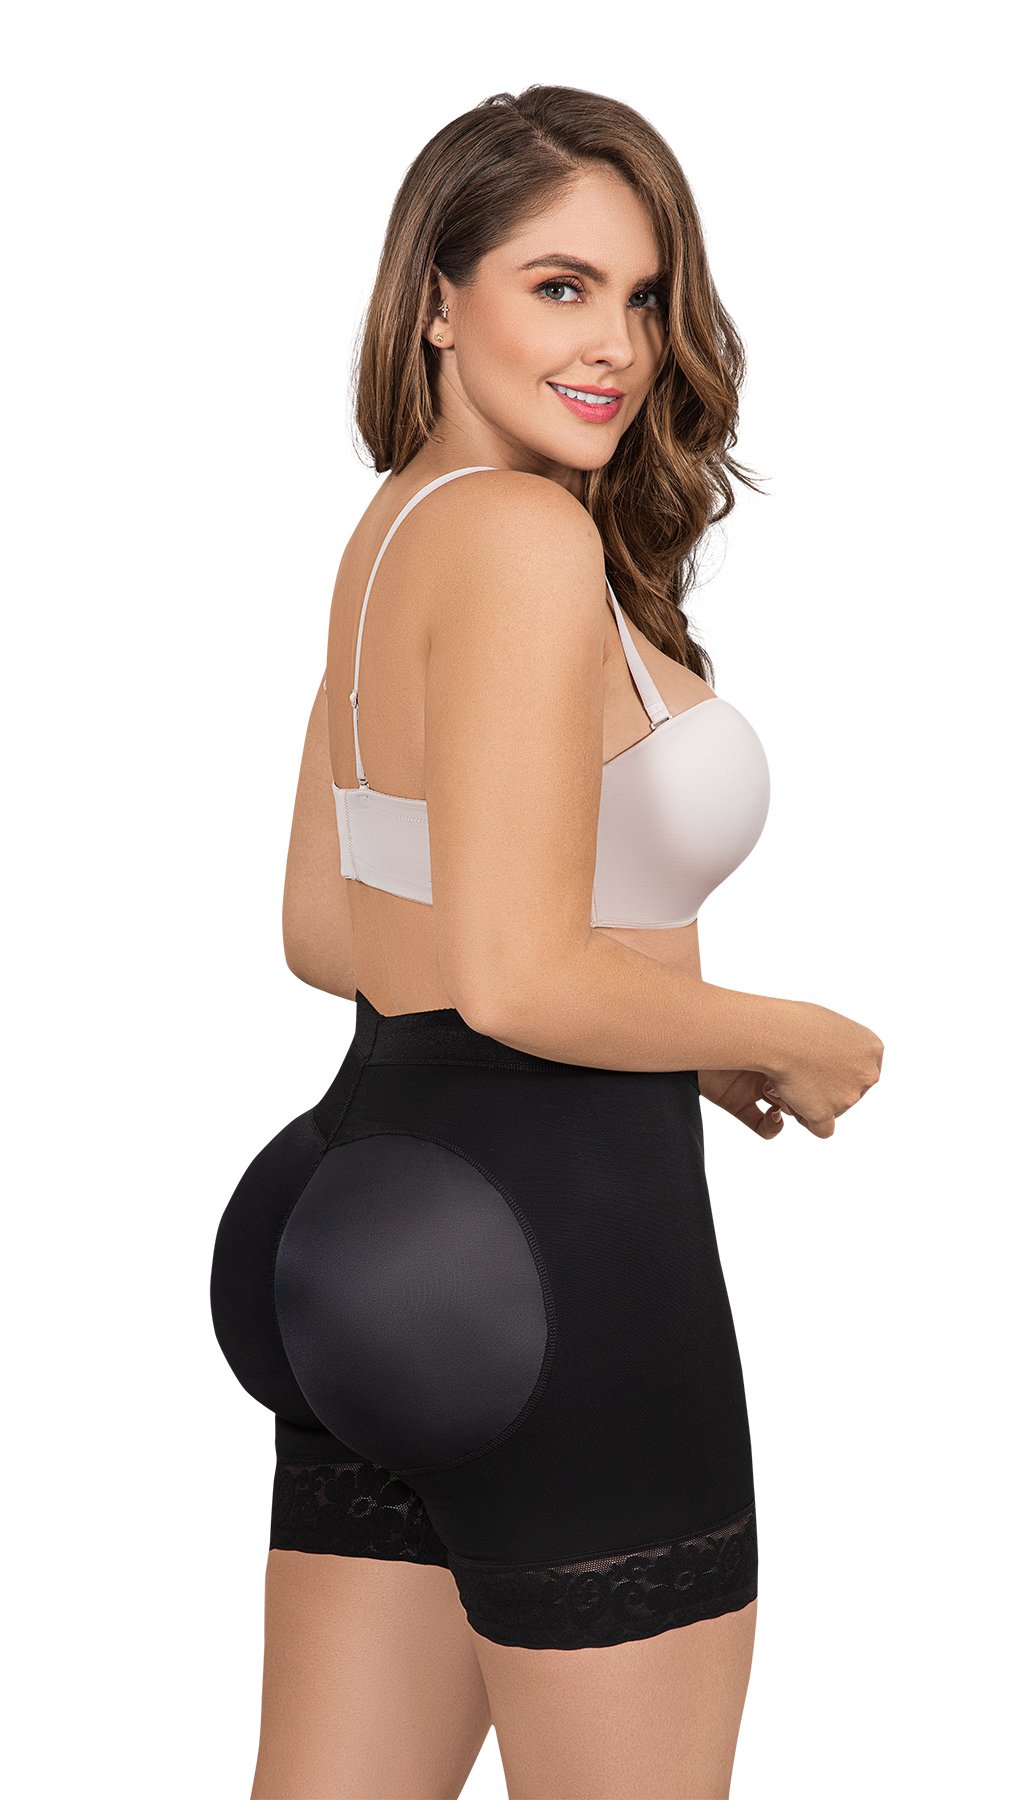 Buy Shapex Curve Shape Butt Lifting Boy Shorts Thighs Lift Up And